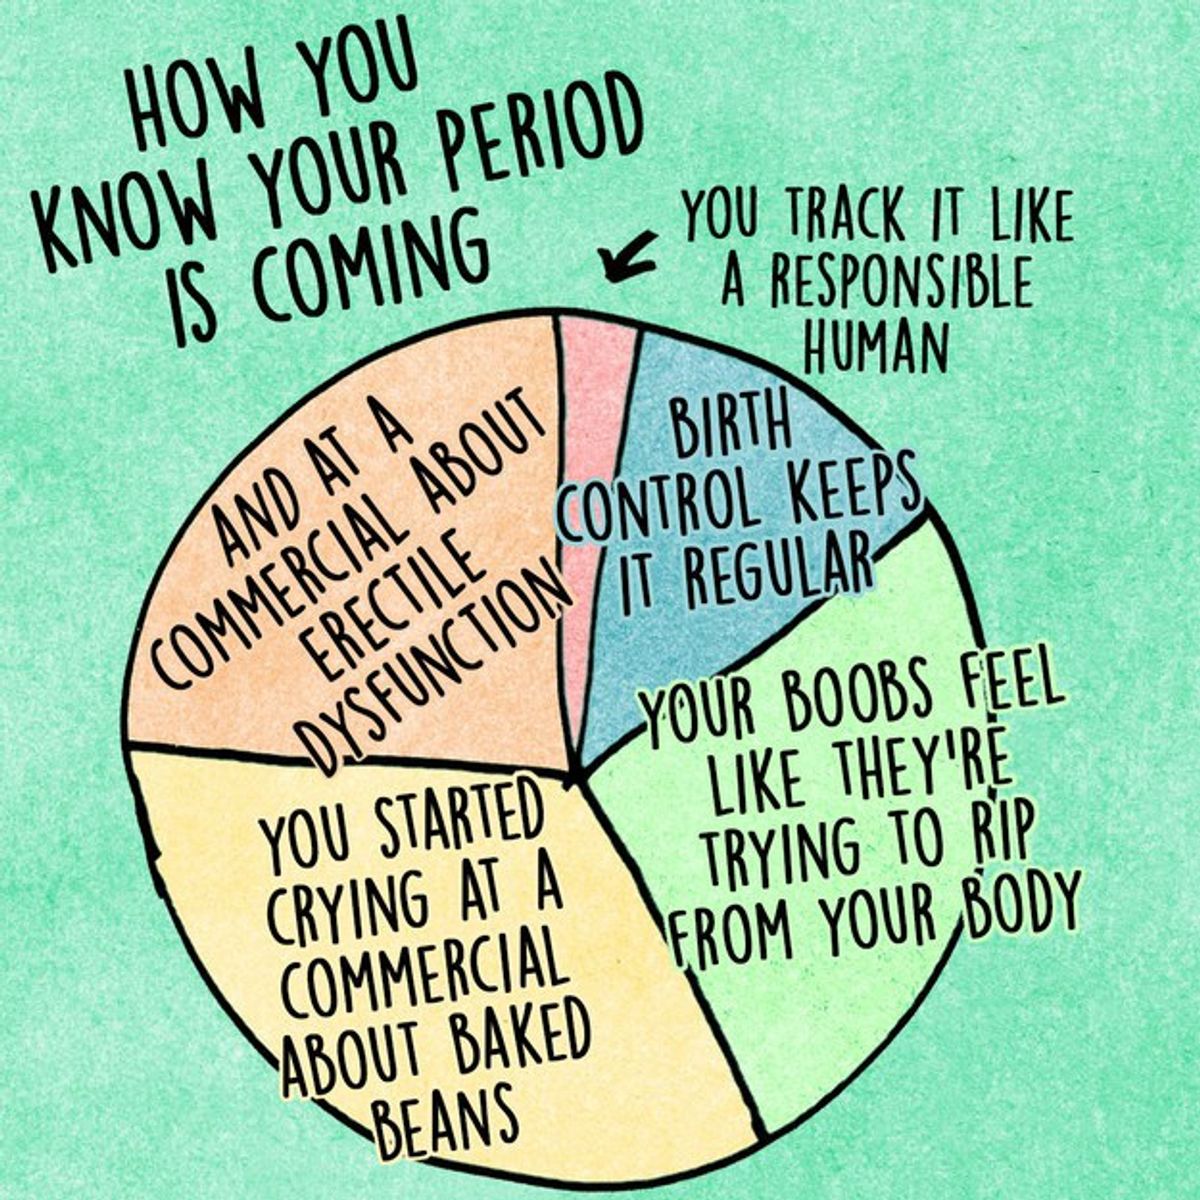 5 Ways To Deal With Your Period